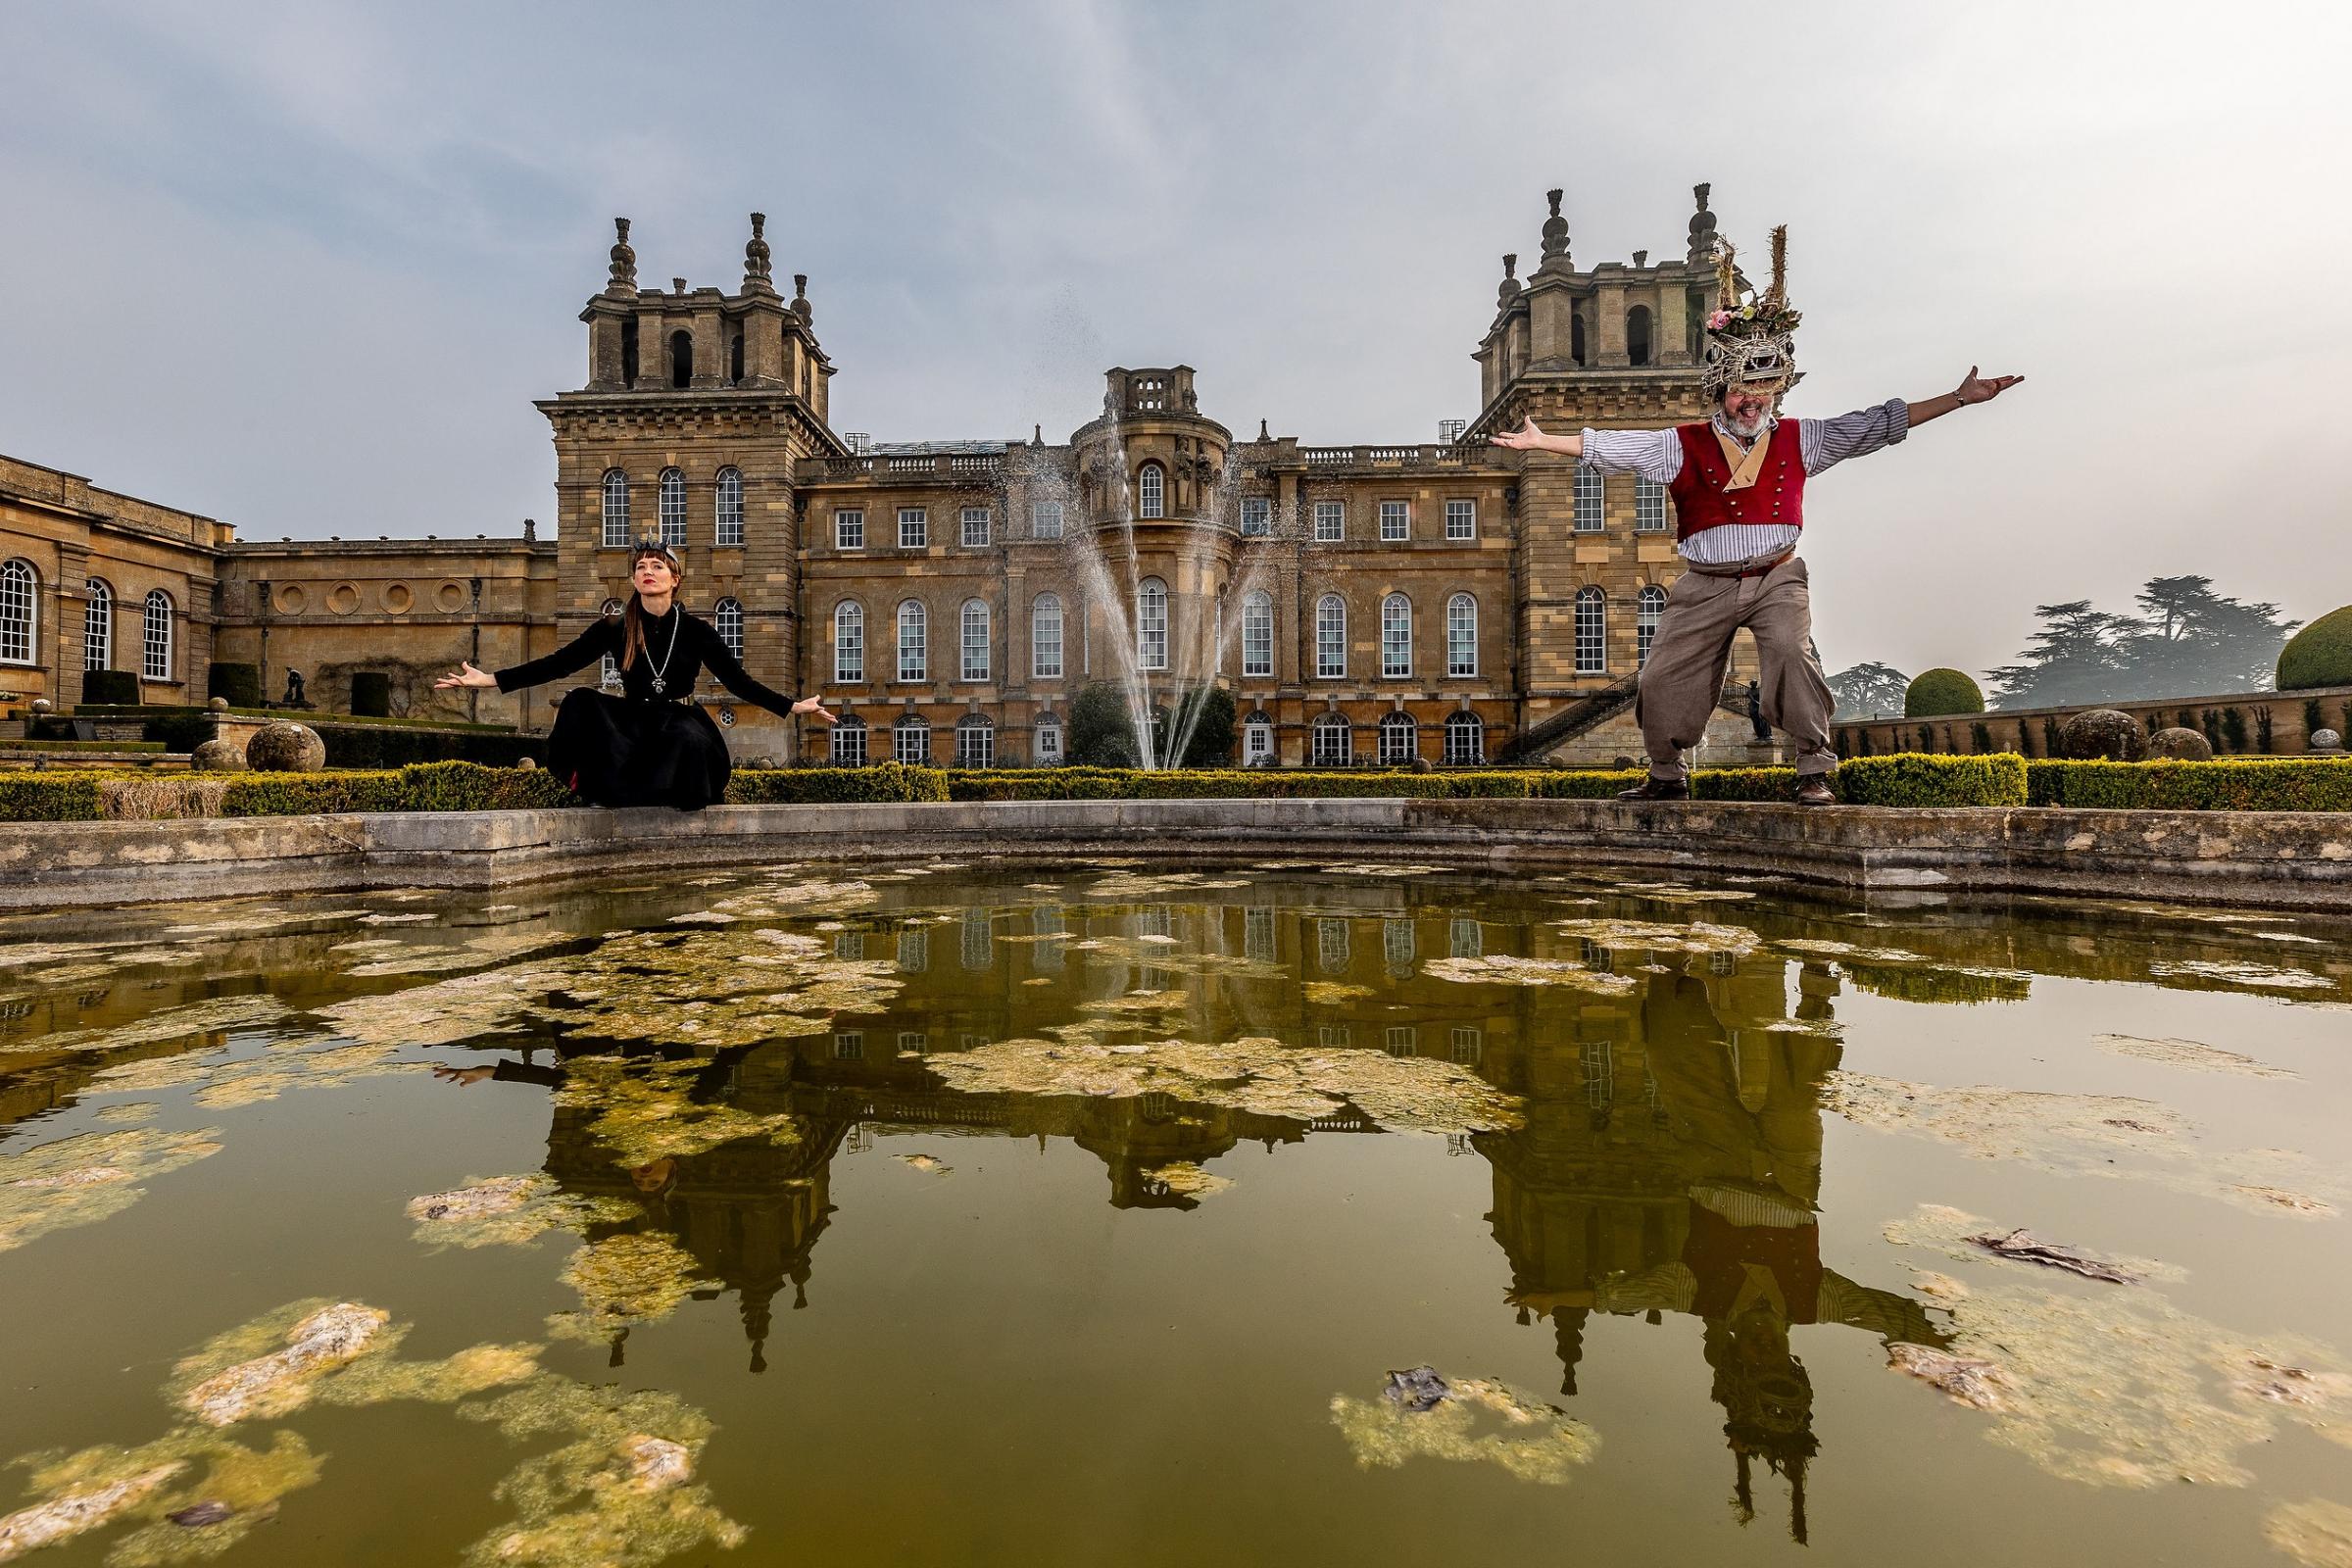 Shakespeare’s Rose Theatre to pop up at Blenheim Palace